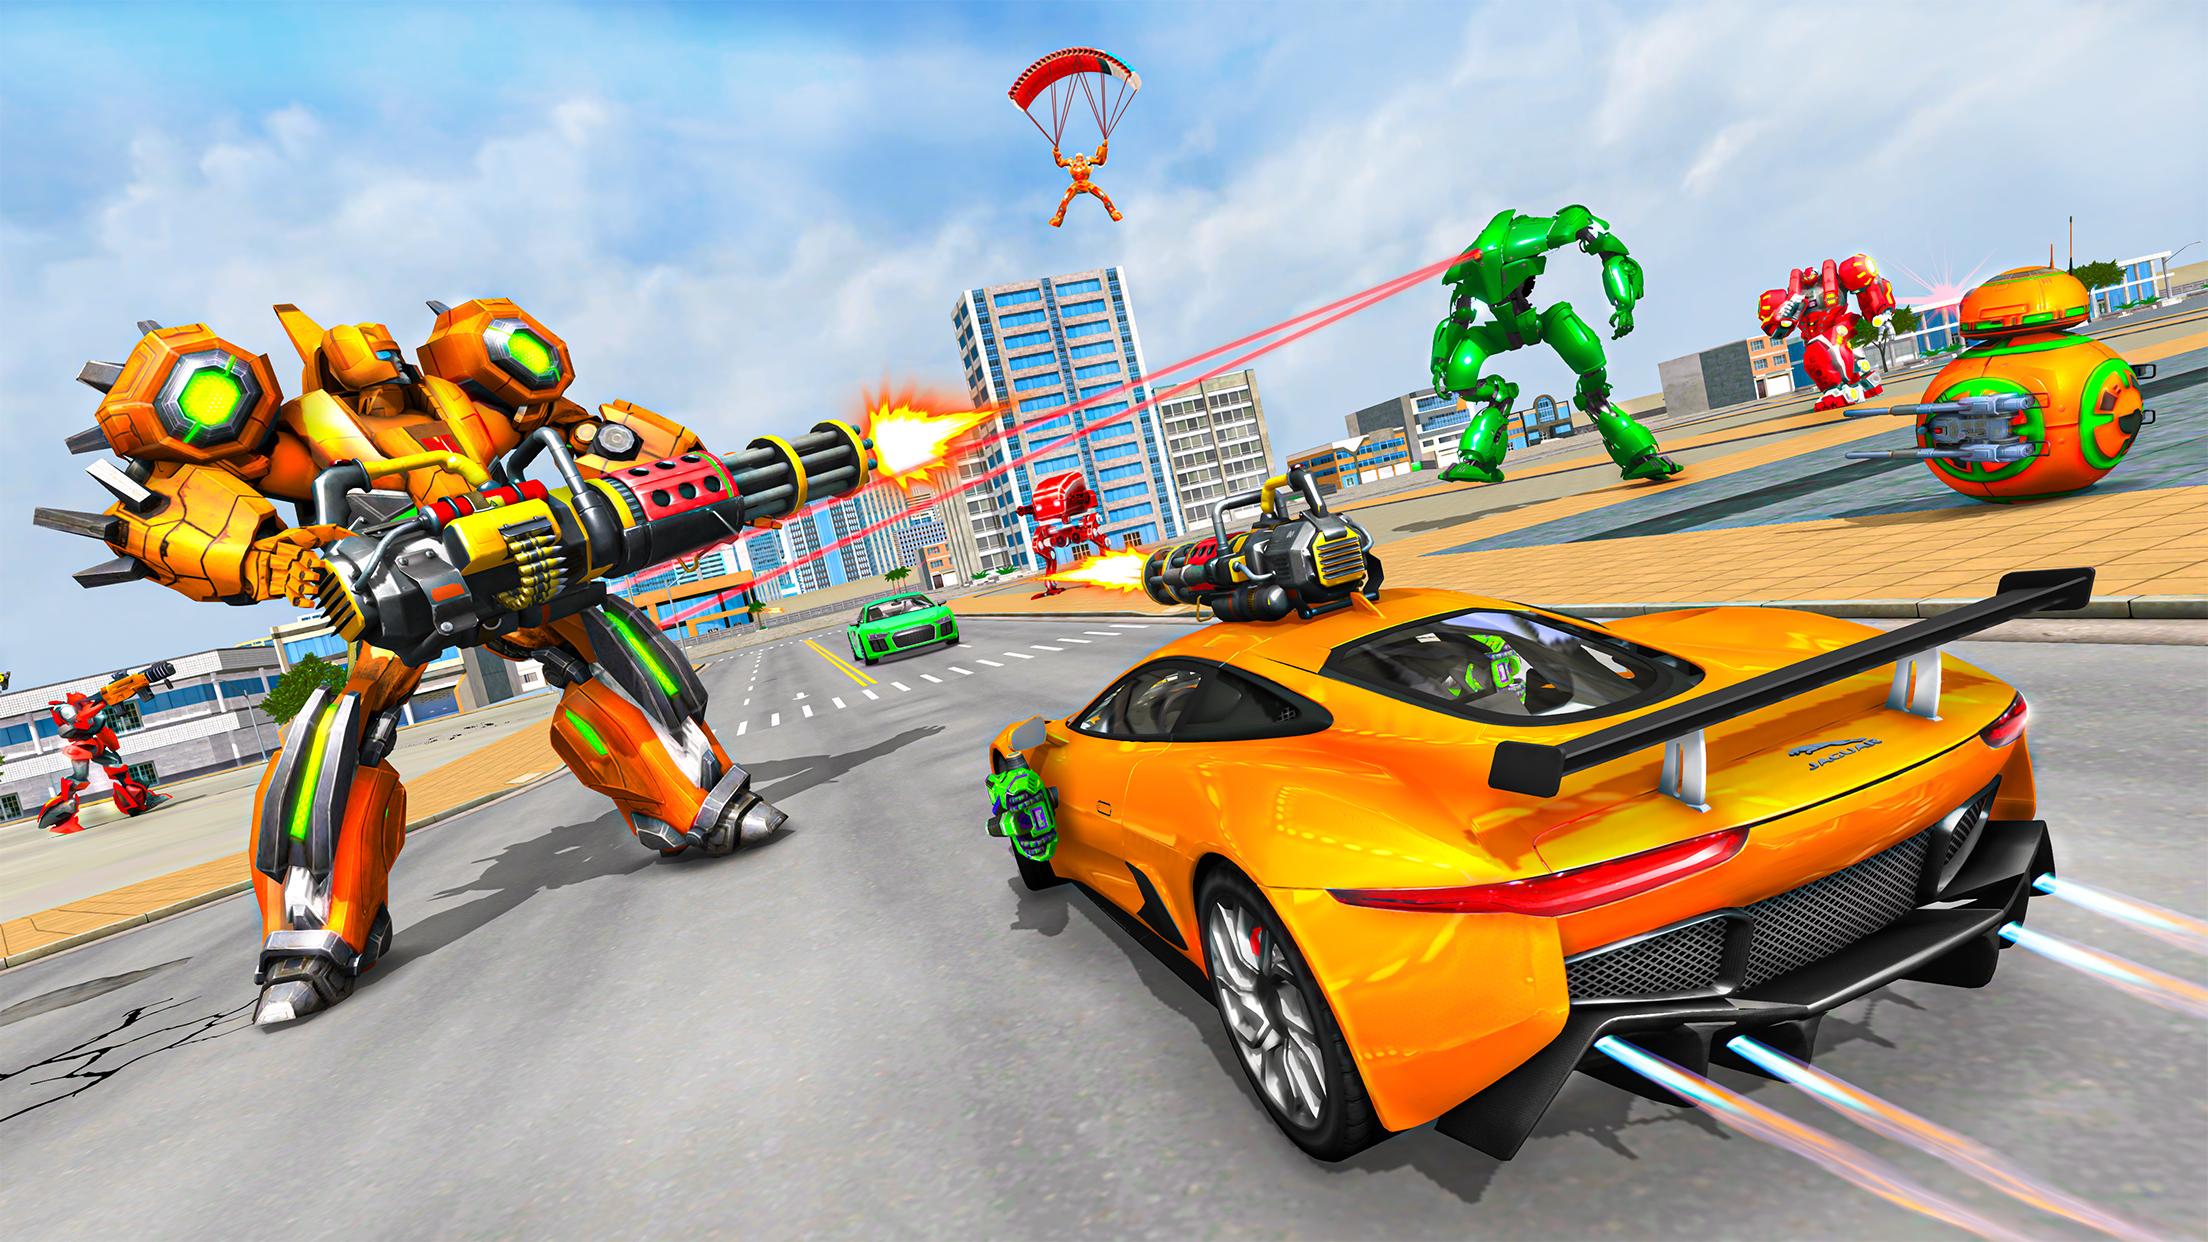 Robot Ball Car Transform game for Android - APK Download